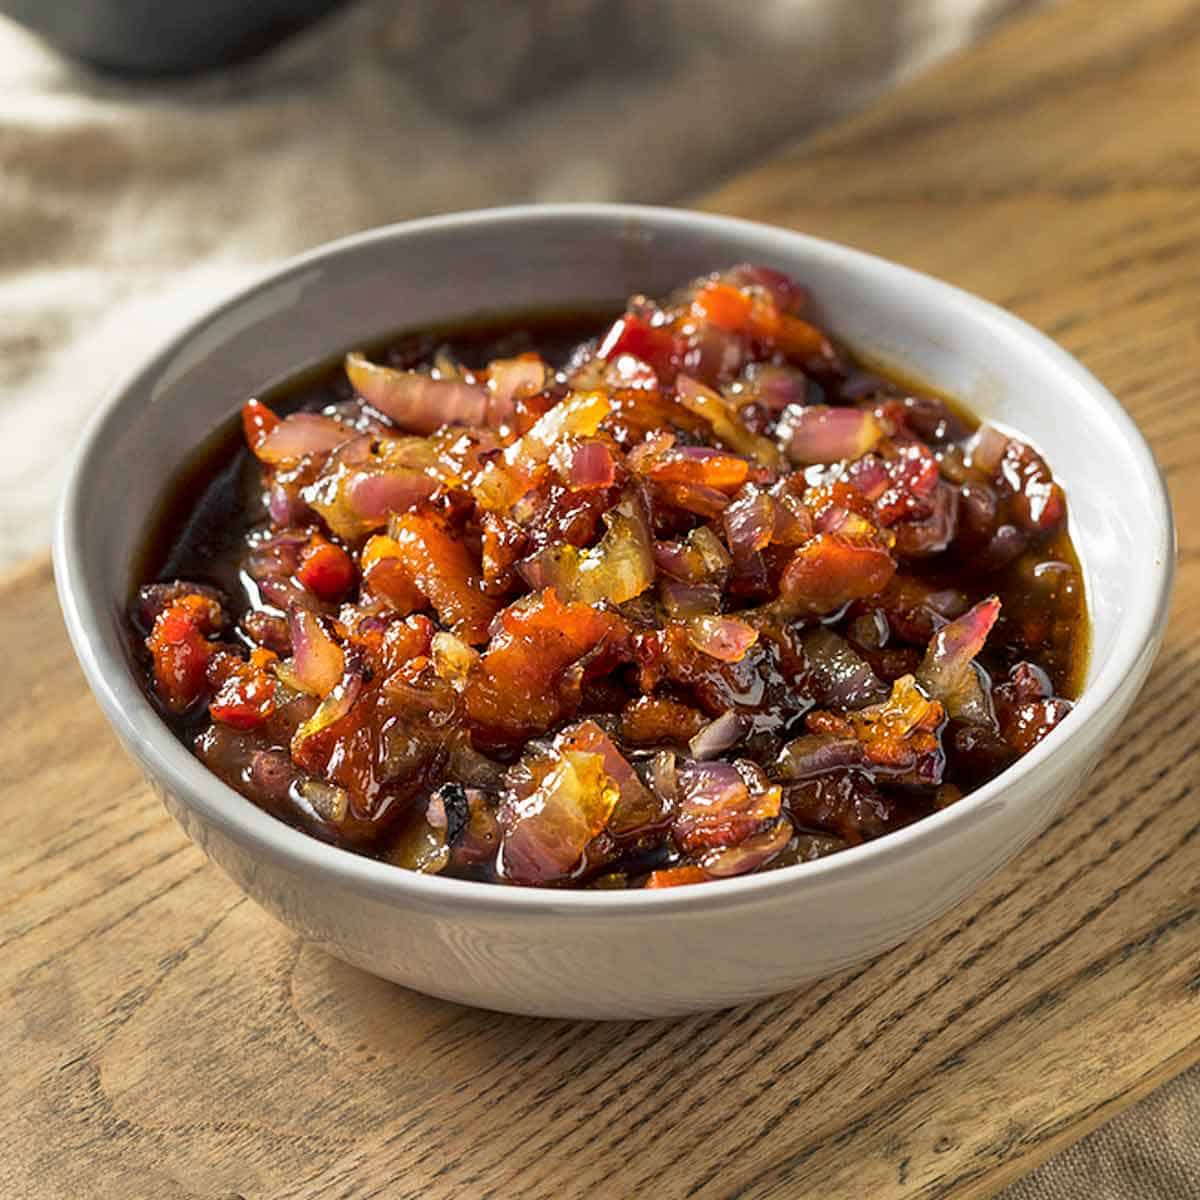 Bacon Jam in a small ceramic serving dish.